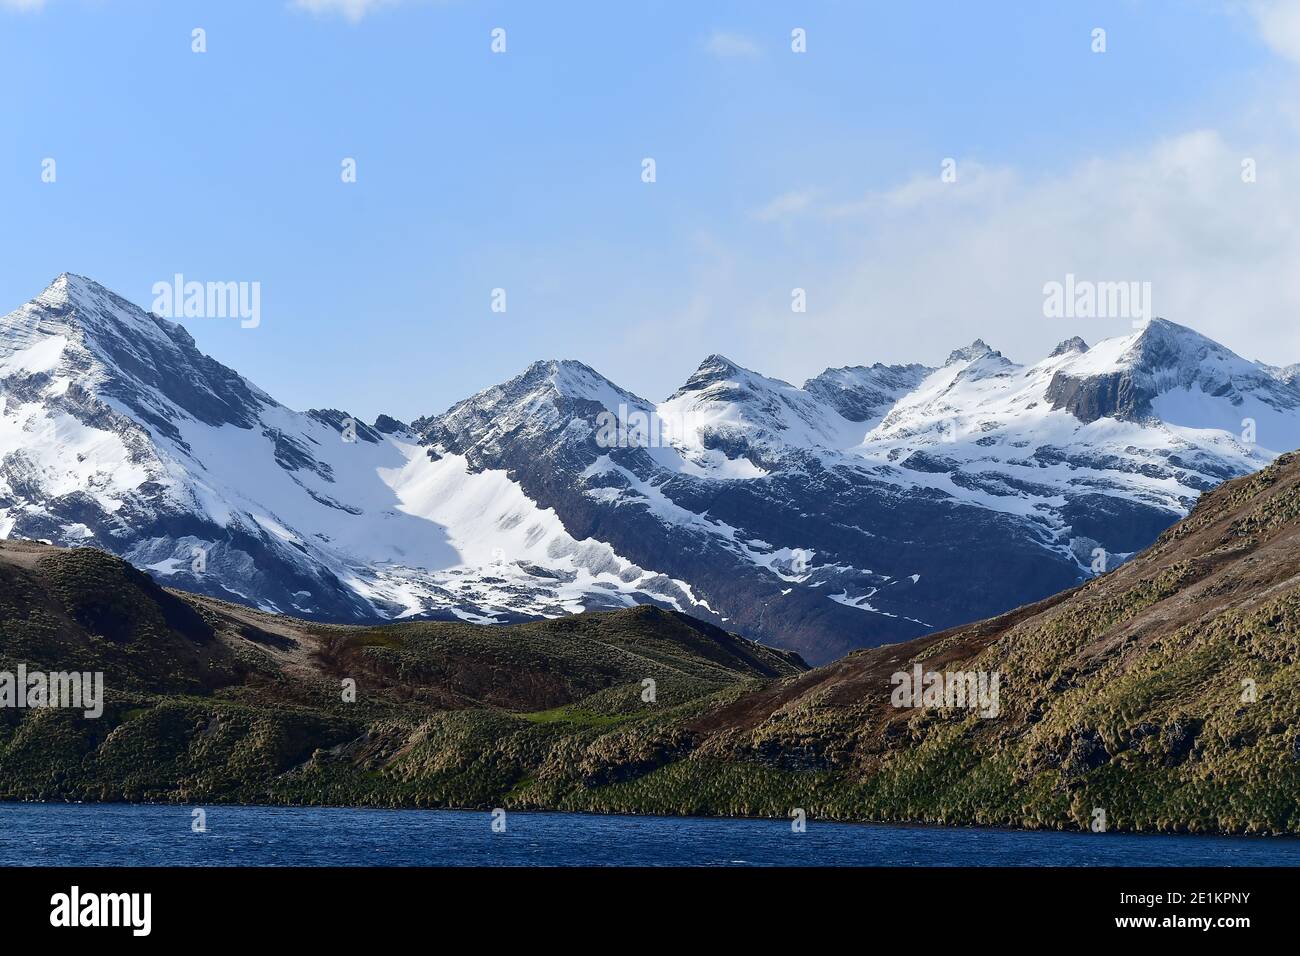 Snowcapped mountainside ranges, tower above the tussock grass landscaped shores of South Georgia in the Southern Atlantic Ocean. Stock Photo